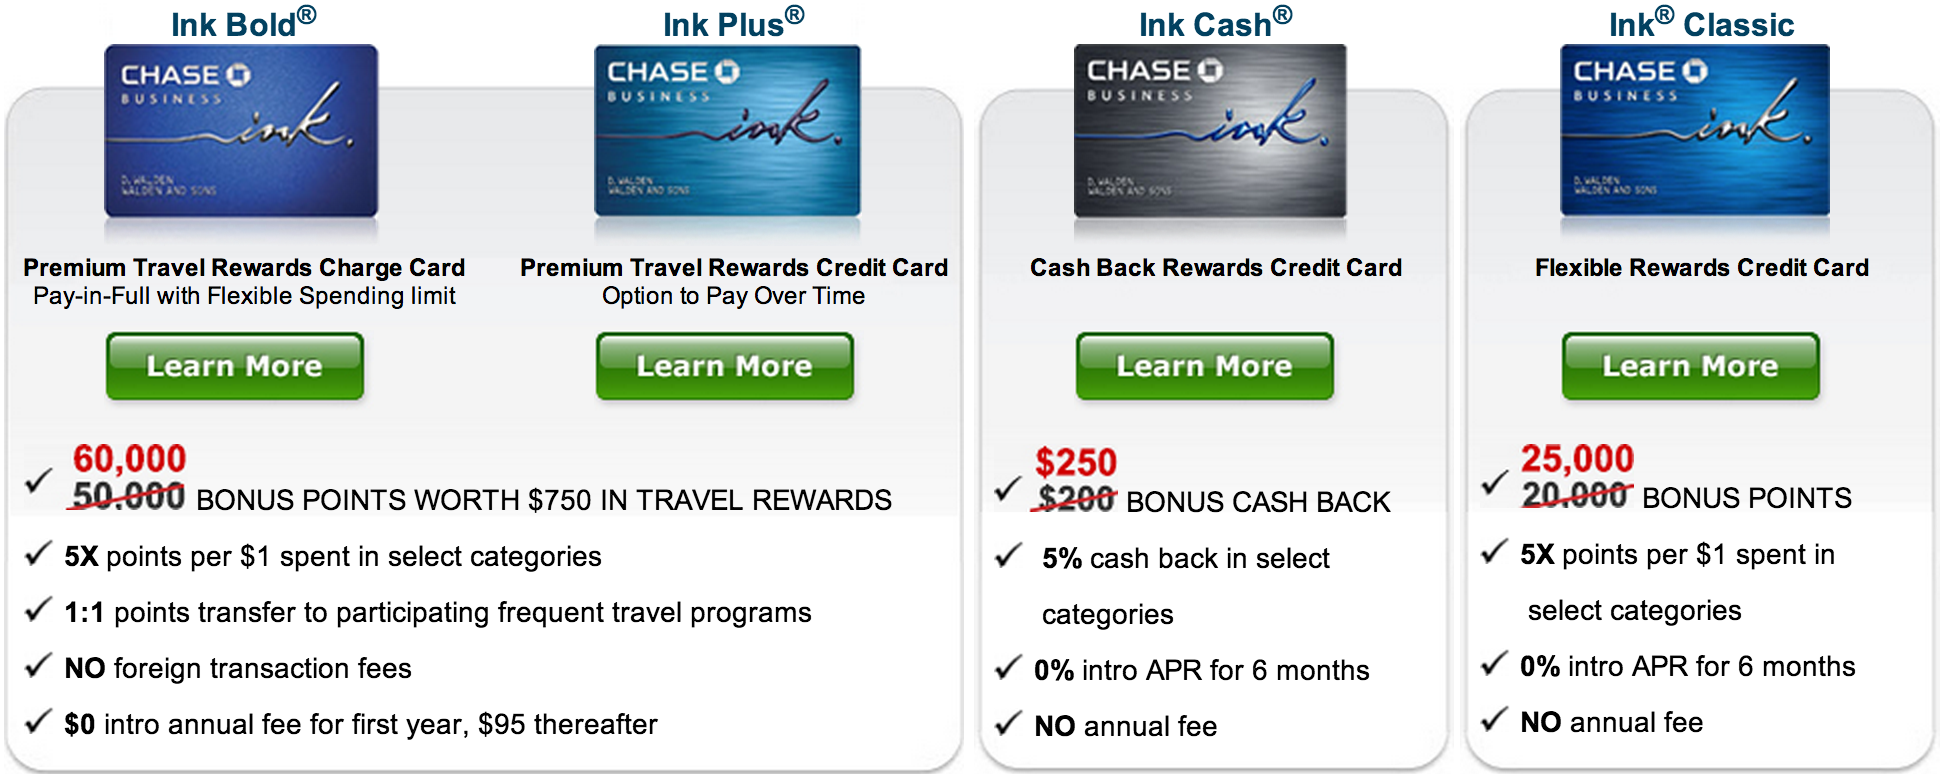 Limited-Time Offer: 60,000 Ultimate Reward Points with Chase Ink